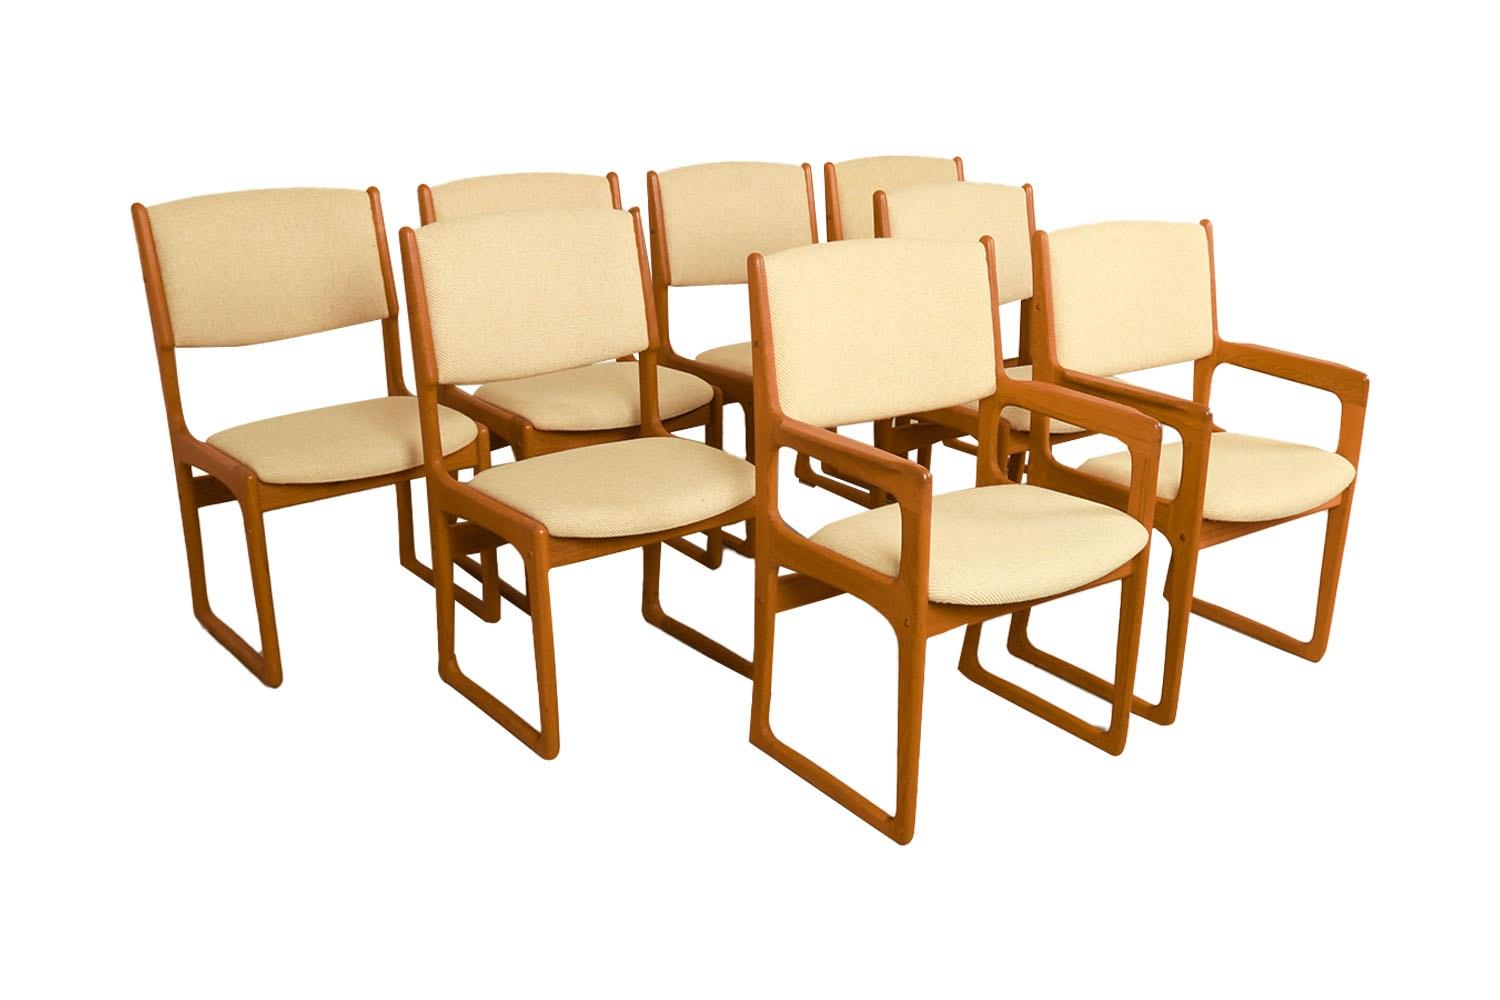 Set of eight beautifully sculpted Danish Modern teak-dining chairs designed by Benny Linden. Maker’s label under seat {Benny Linden Design}. Superbly crafted, sculpted, modern teak dining chairs with padded backrests and seats, this set includes two